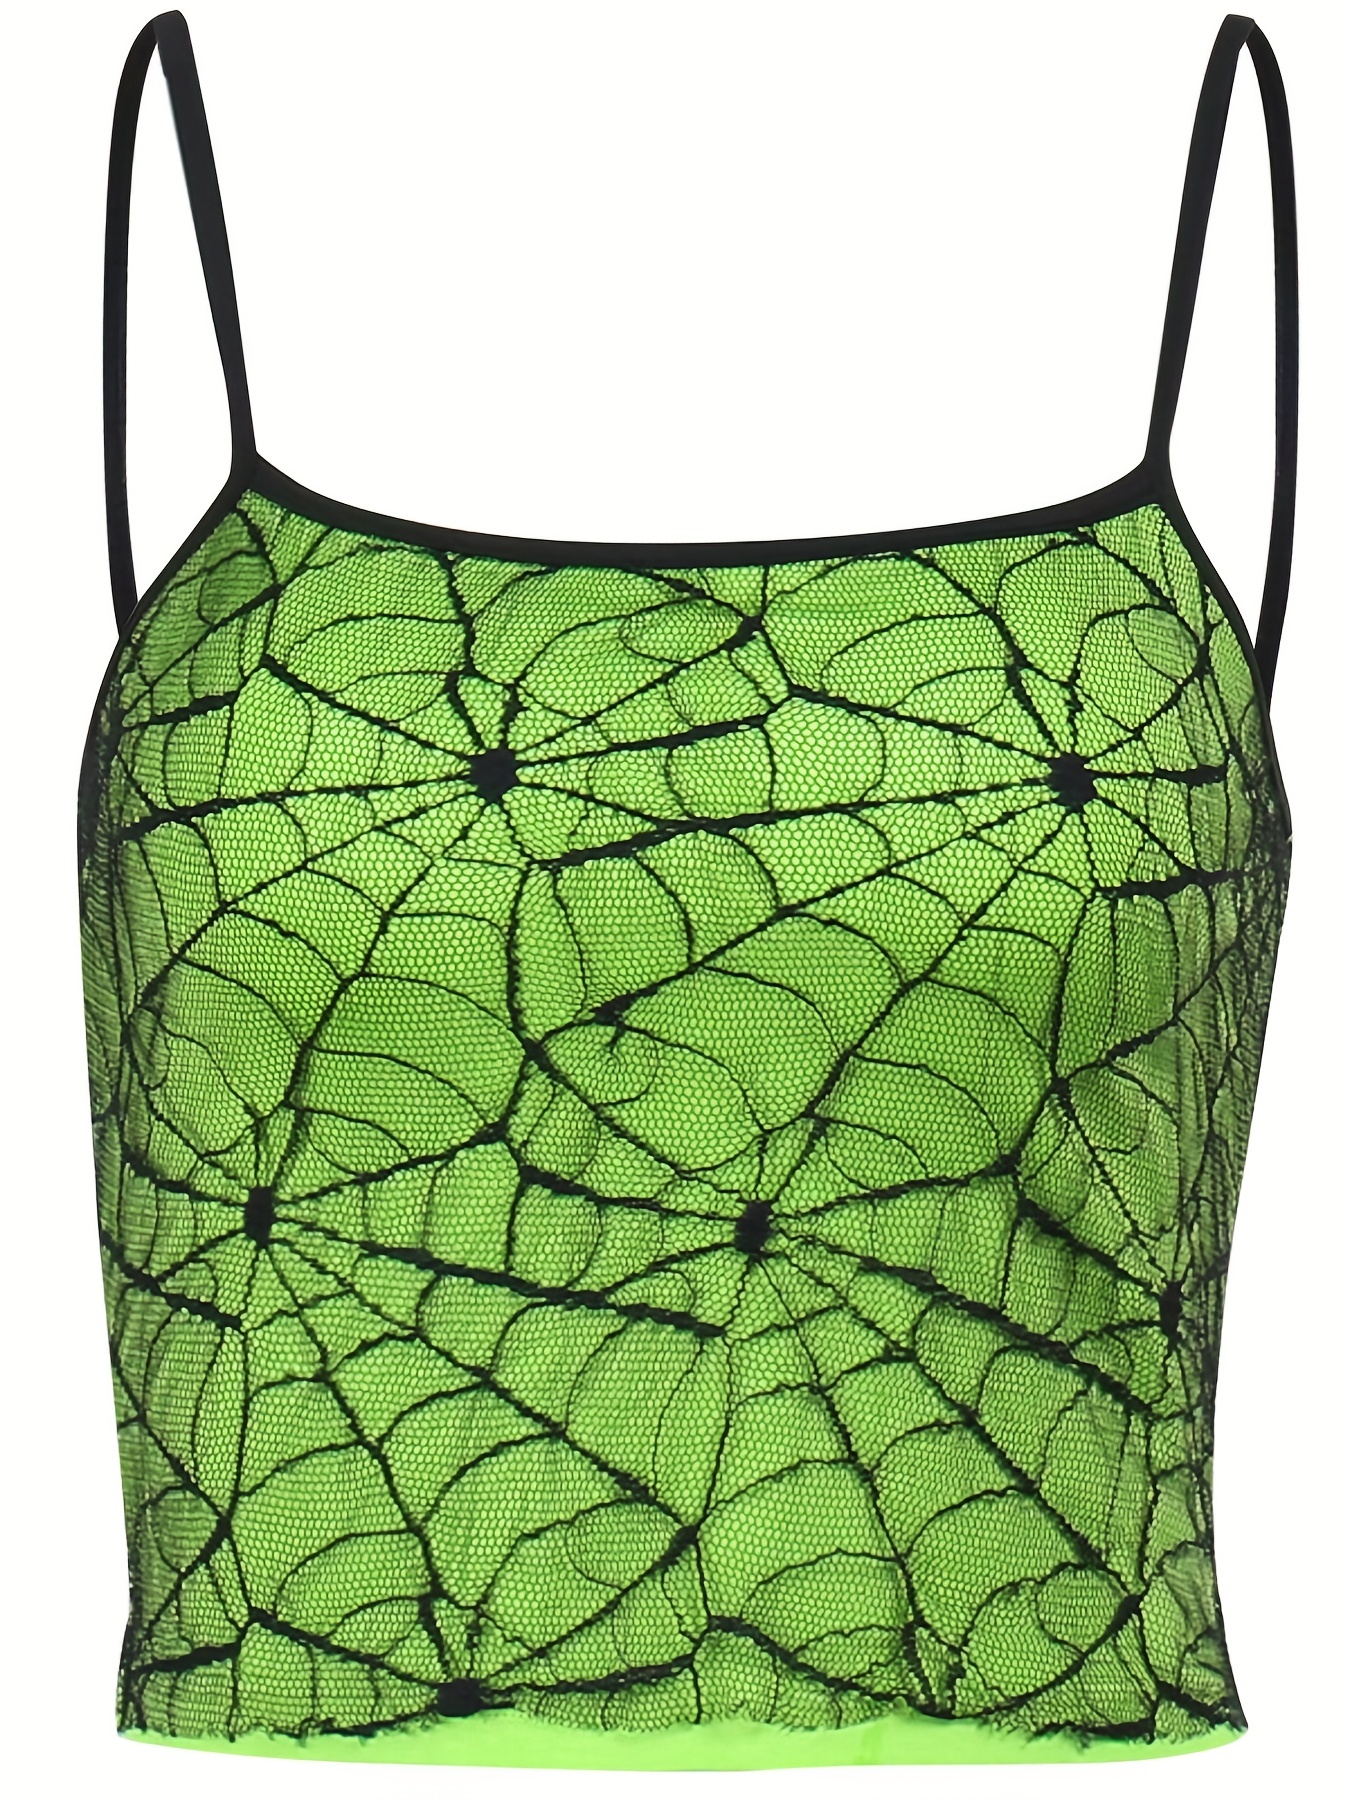 Spider Web Tank Top, Fitted Tank Top, Athletic Tank Top,fitted